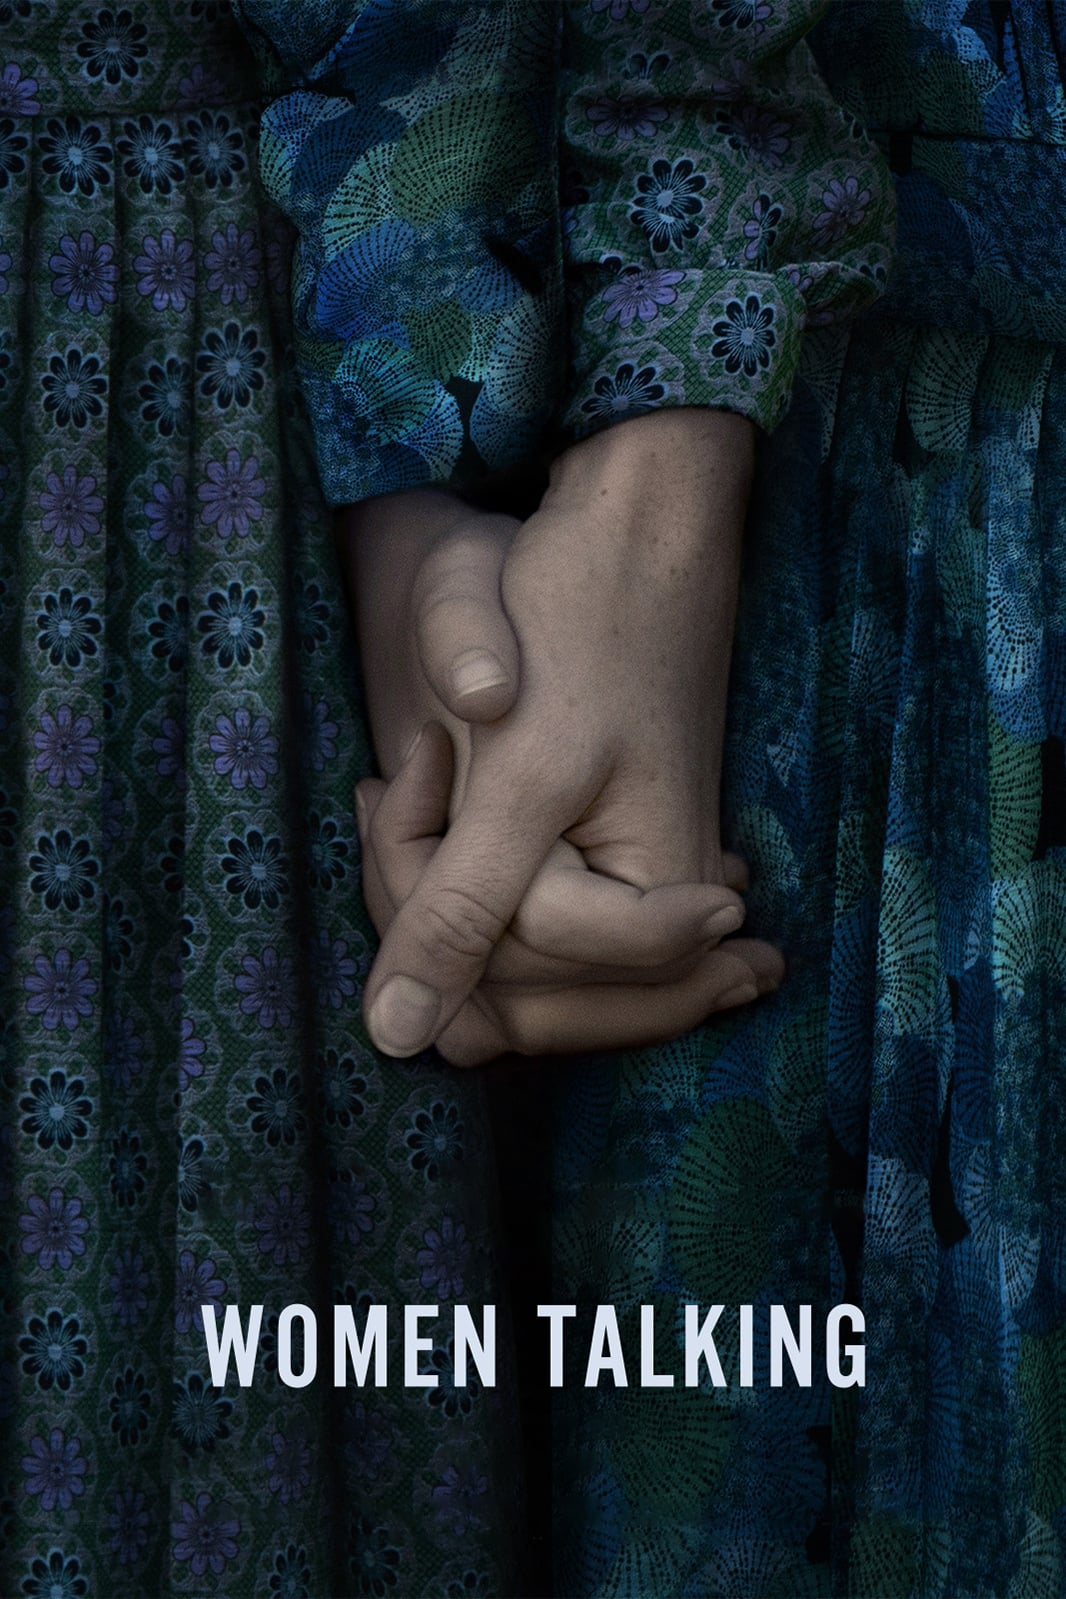 Poster for the movie "Women Talking"